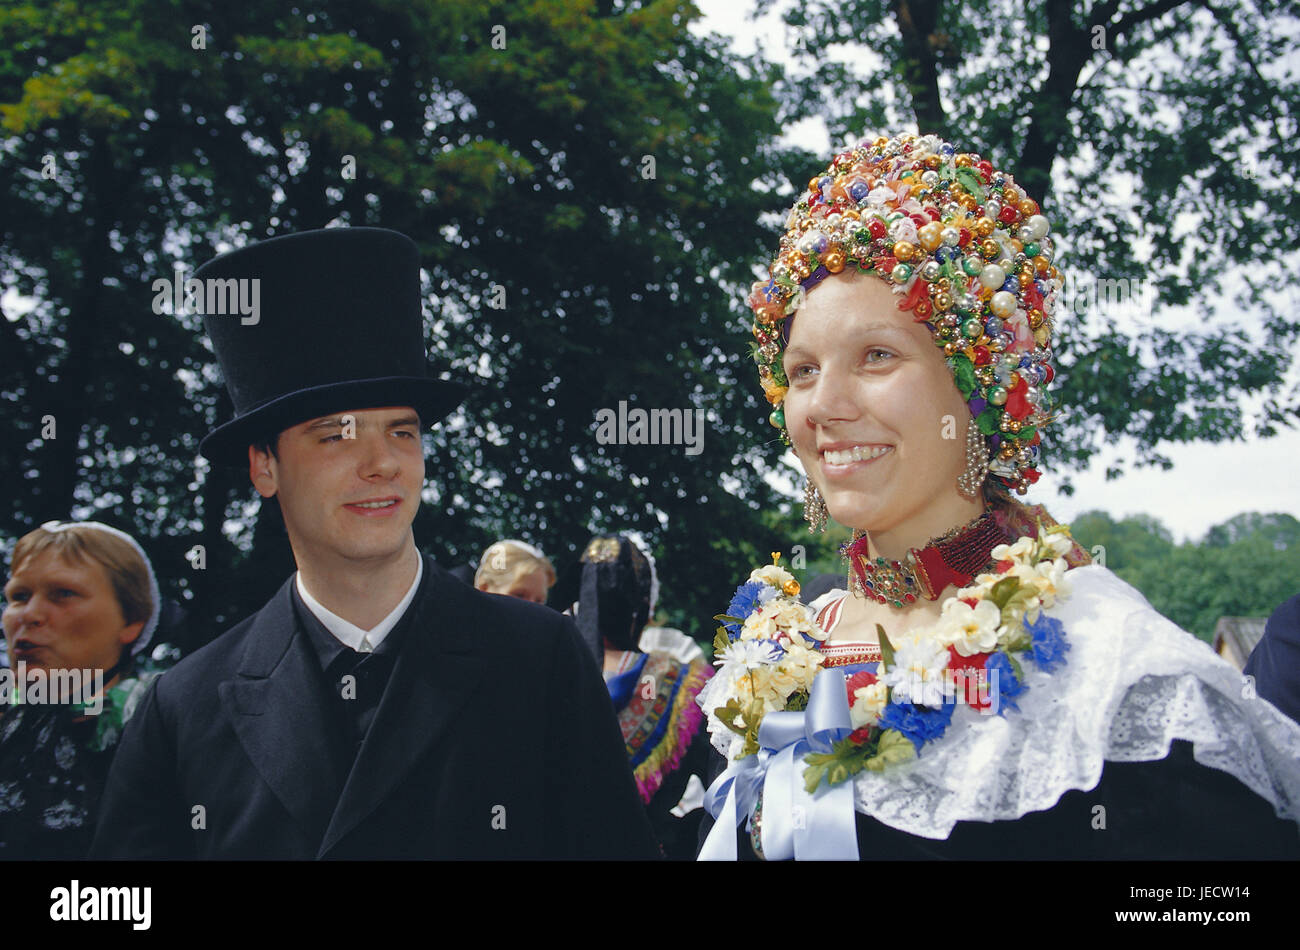 Germany, North Rhine-Westphalia, Separating-Schwalenberg, Couple, National costume, historically, Teutoburger wood, place of interest, festival with traditional costumes, feast, solemnity, event, person, folklore, clothes, headgear, fixed clothes, traditionally, portrait, outside, Stock Photo